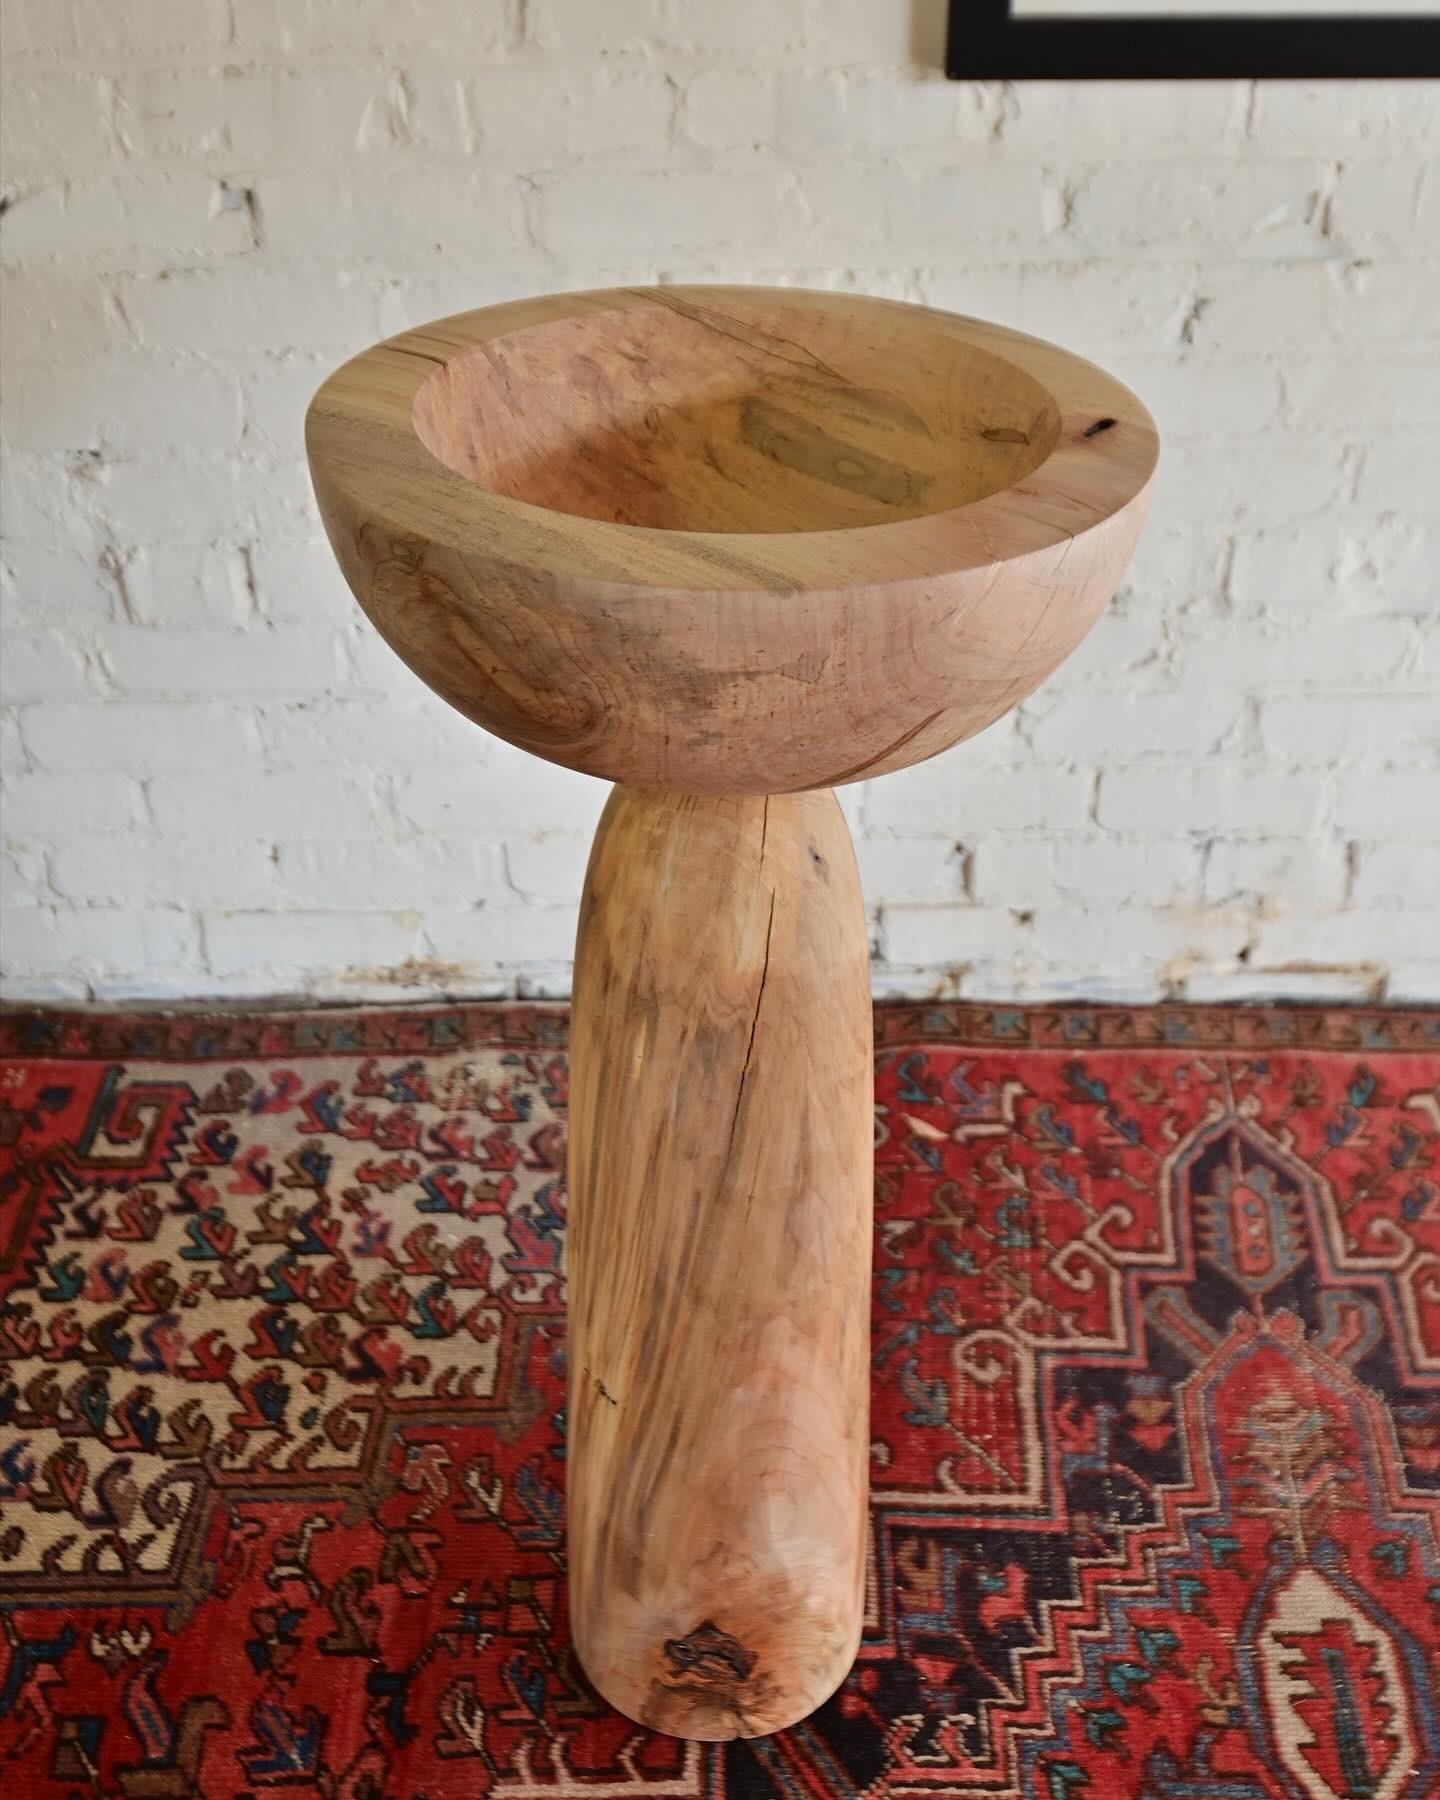 Solid maple sculpture suitable for holding something precious and mundane. The large diameter and thick walls on the bowl allow for thousands of possibilities: placing sand within and burning incense, or even just throwing your keys and loose